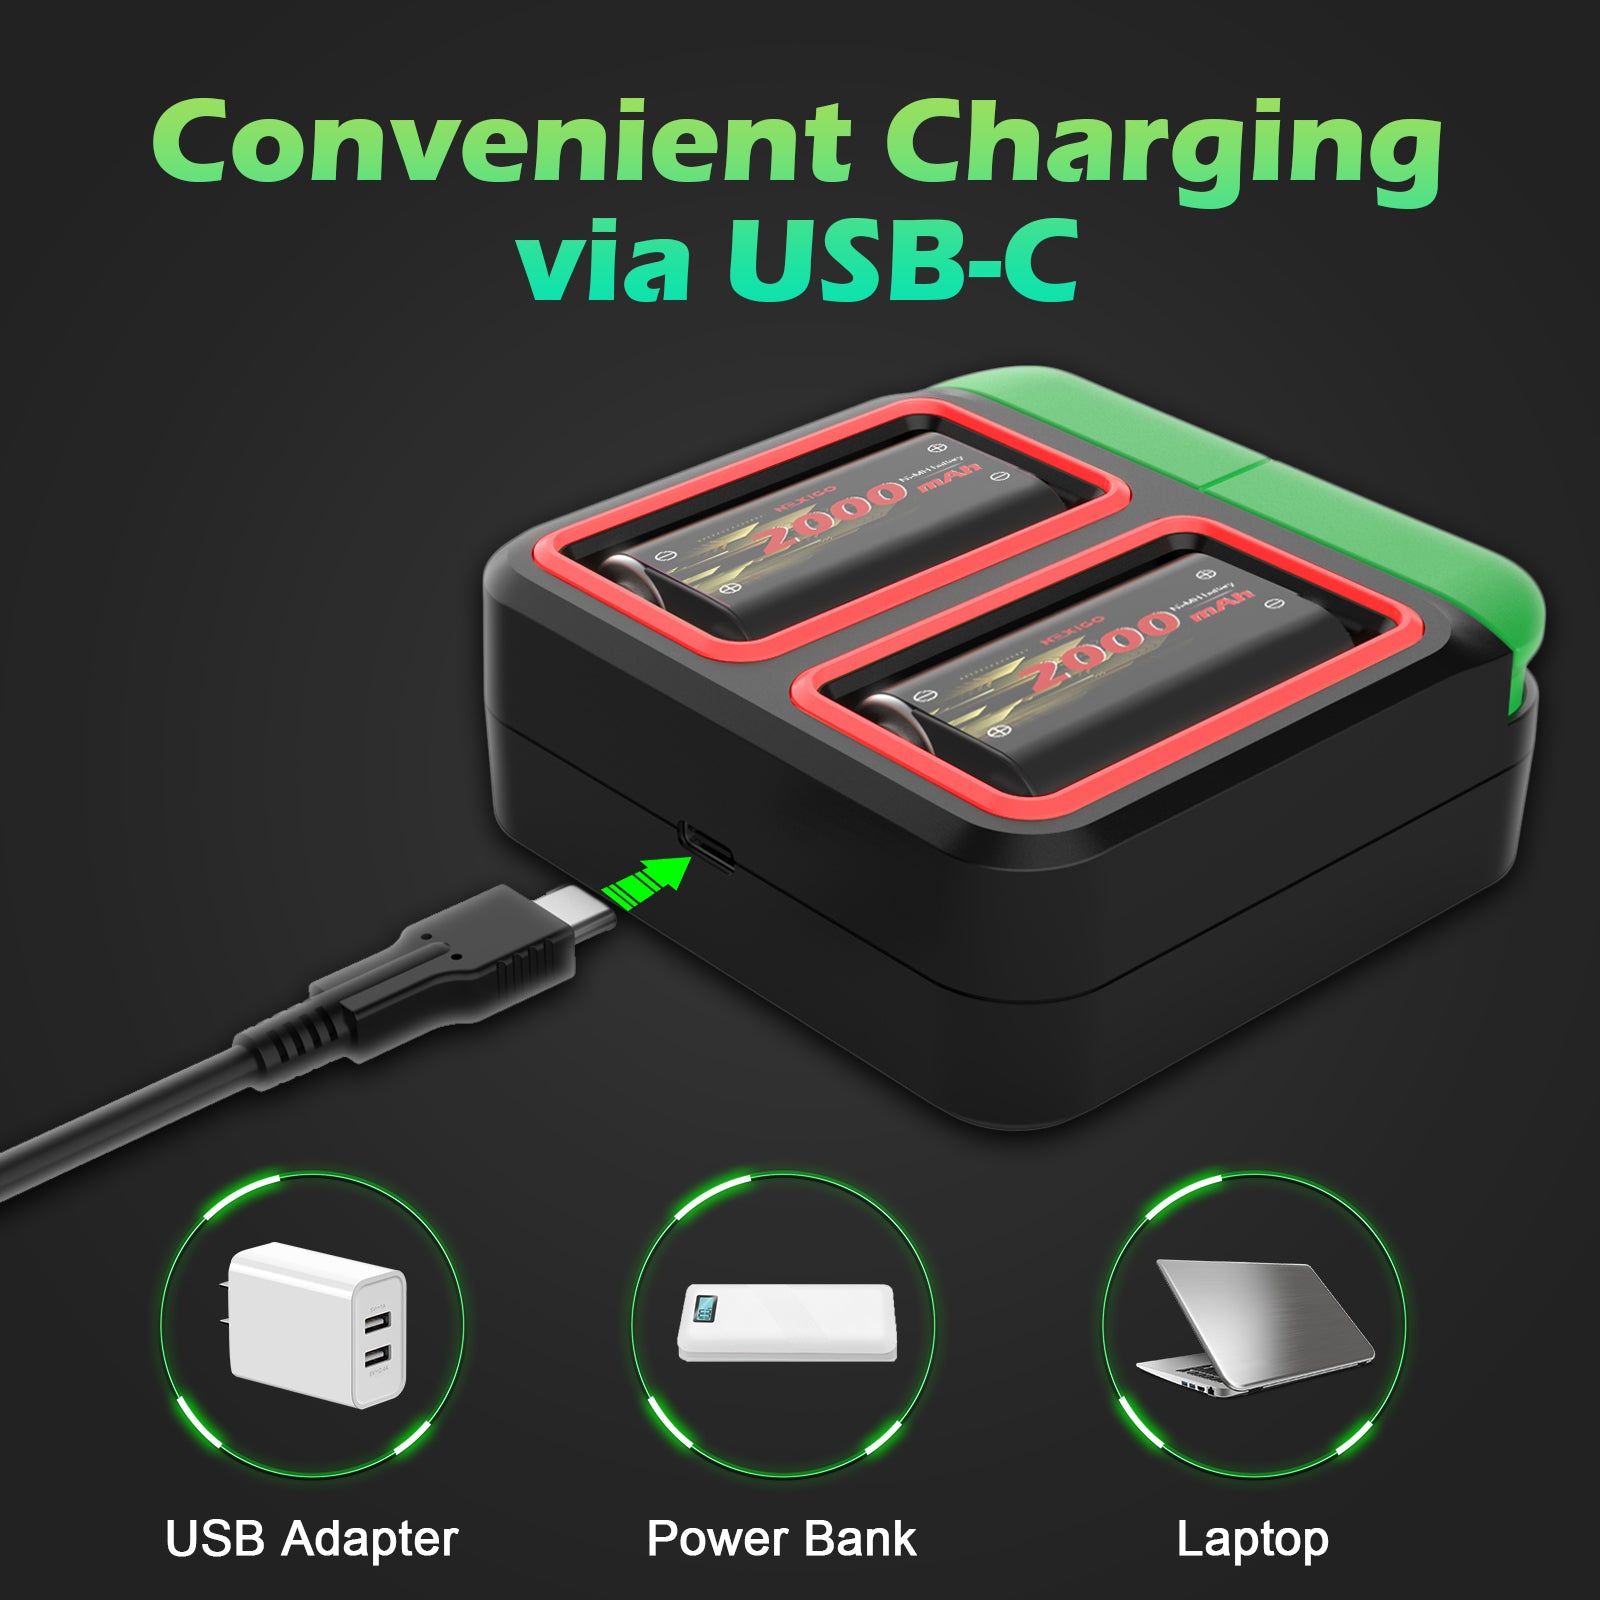 Easily power it up by connecting USB-C cable to adapters, power banks, or laptops. 